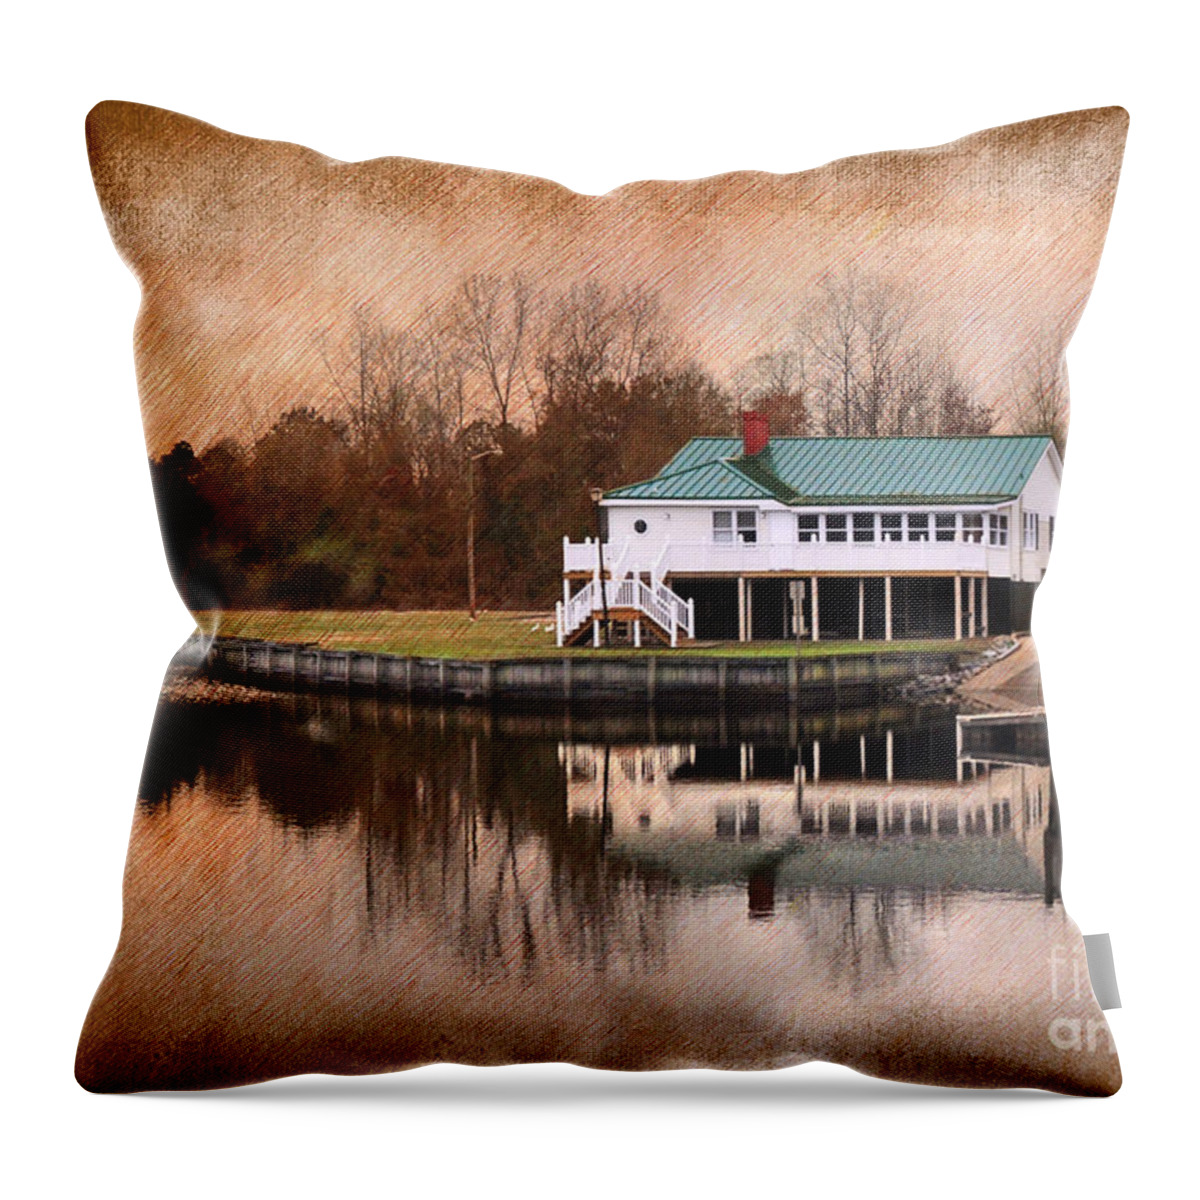 Architecture Throw Pillow featuring the photograph Southern Living by Kathy Baccari